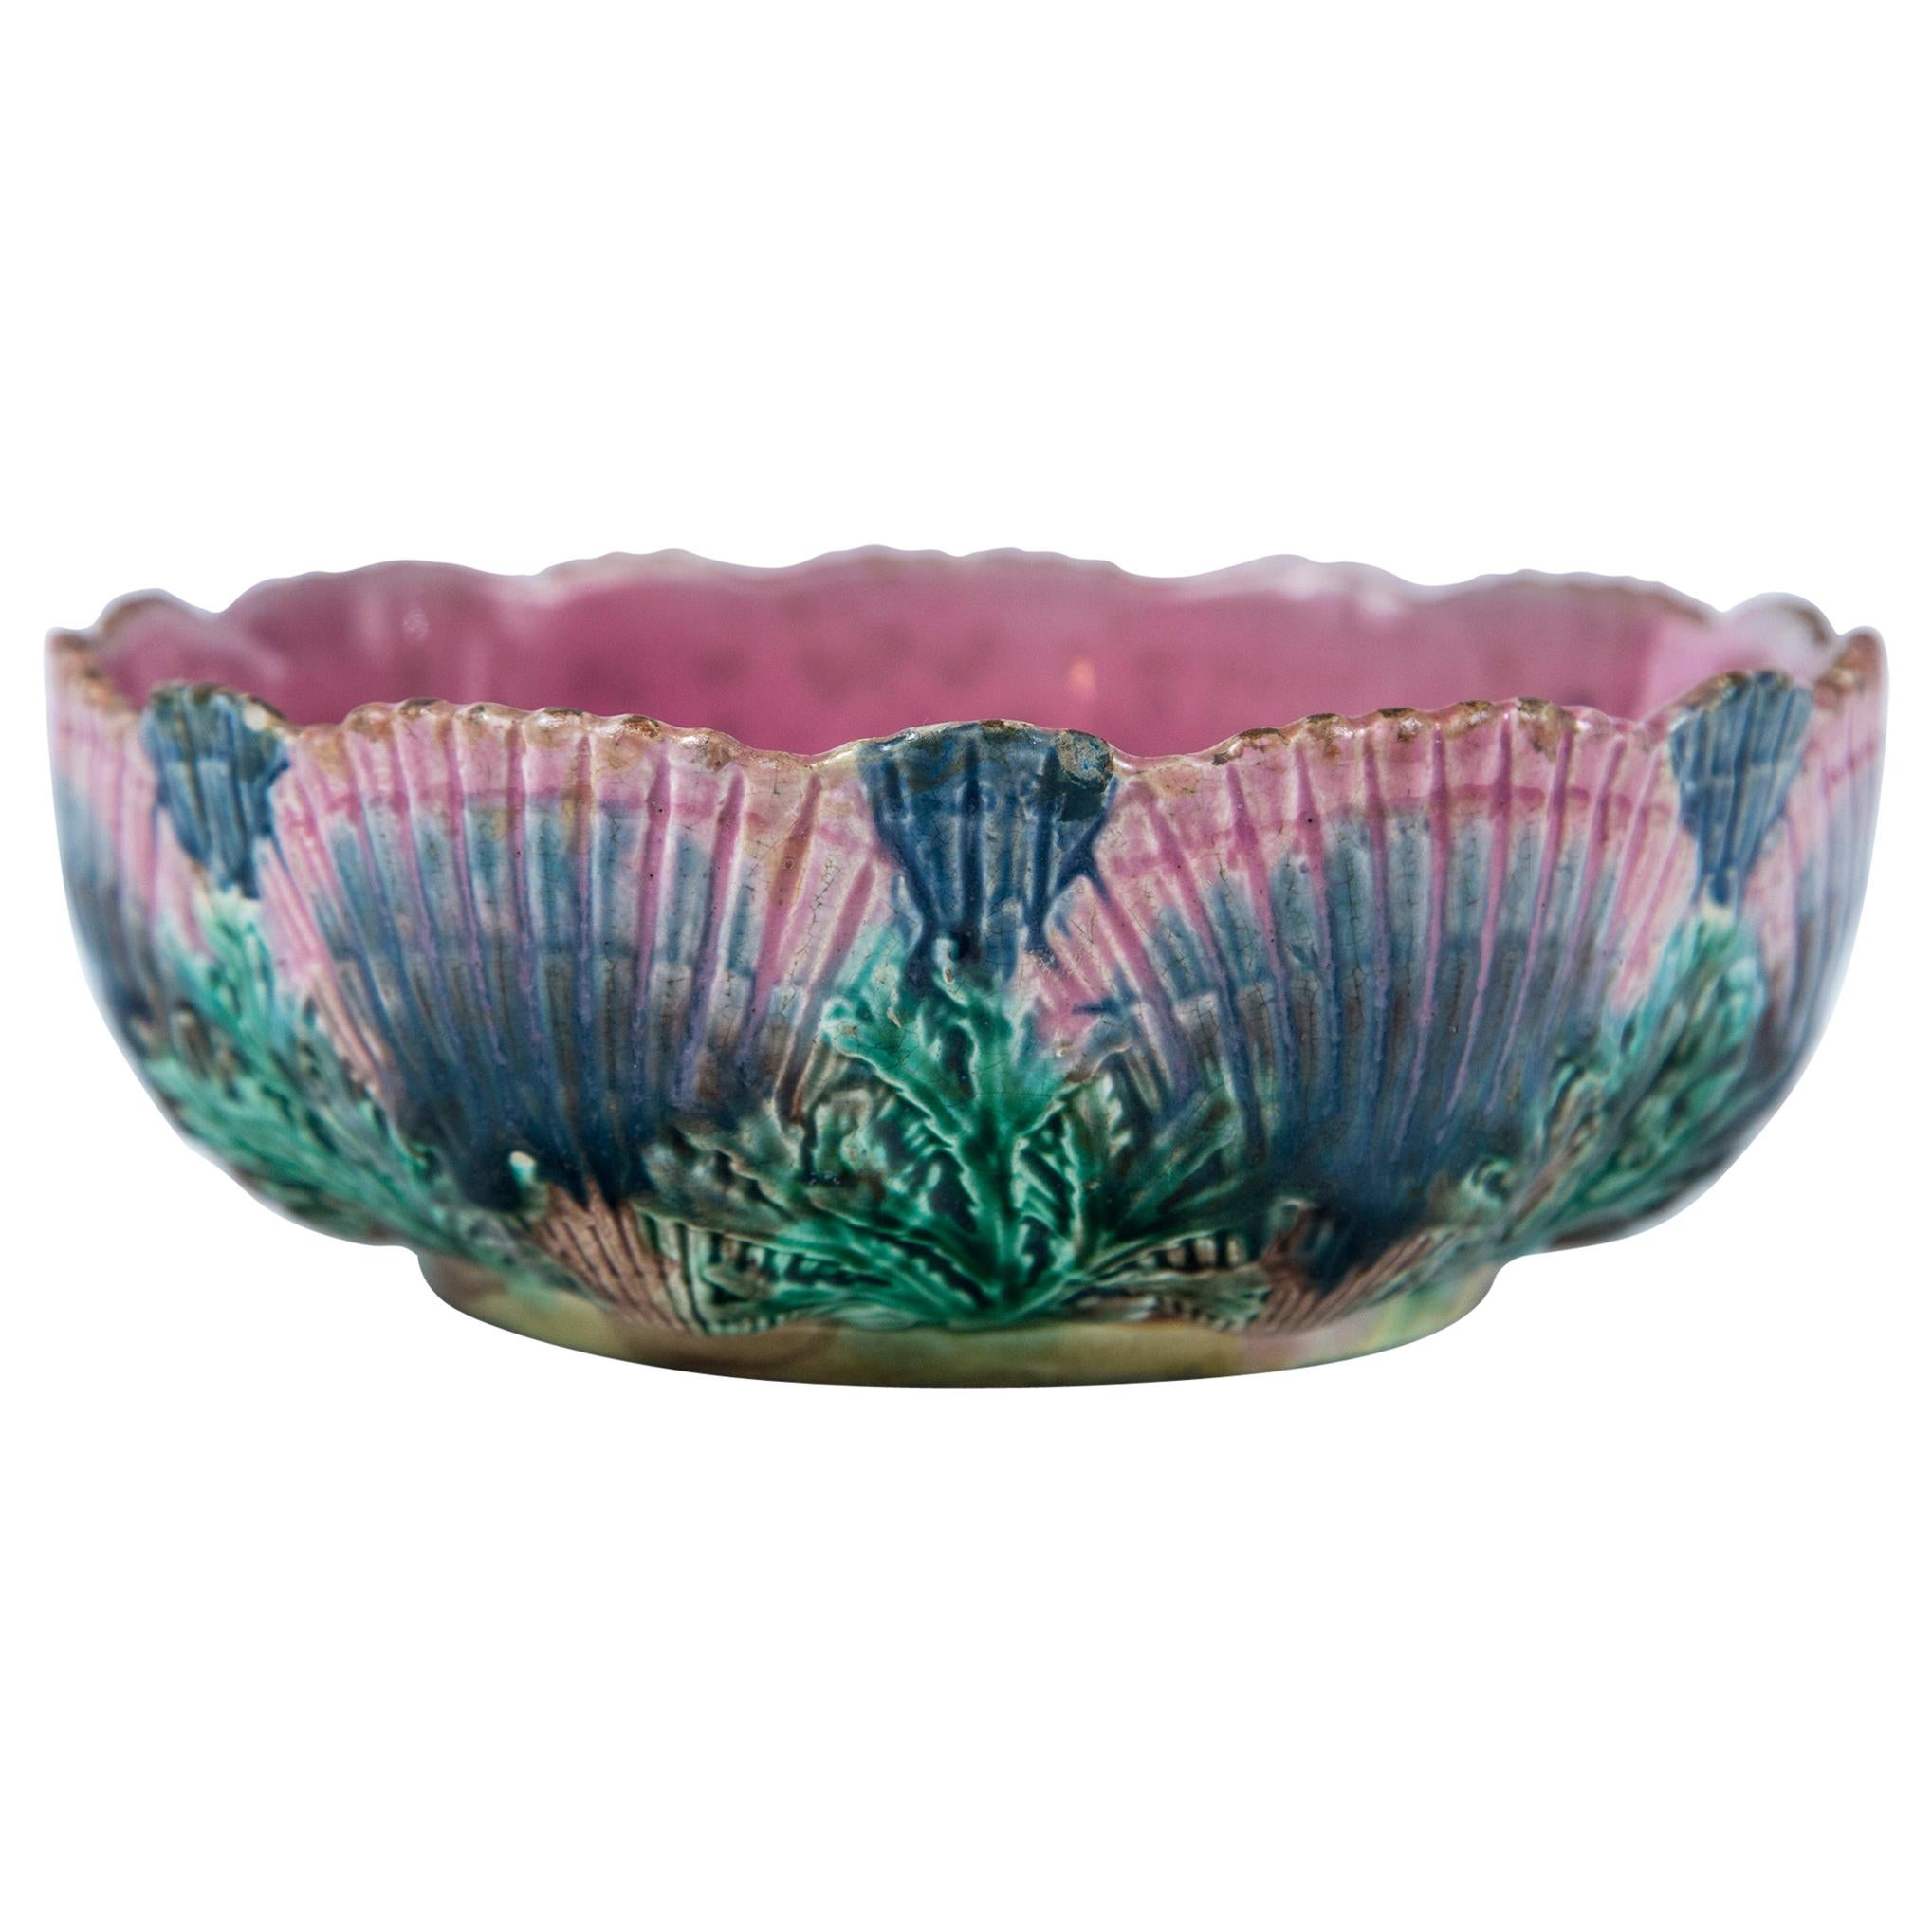 Etruscan Shell and Seaweed Majolica Bowl, Late 19th Century